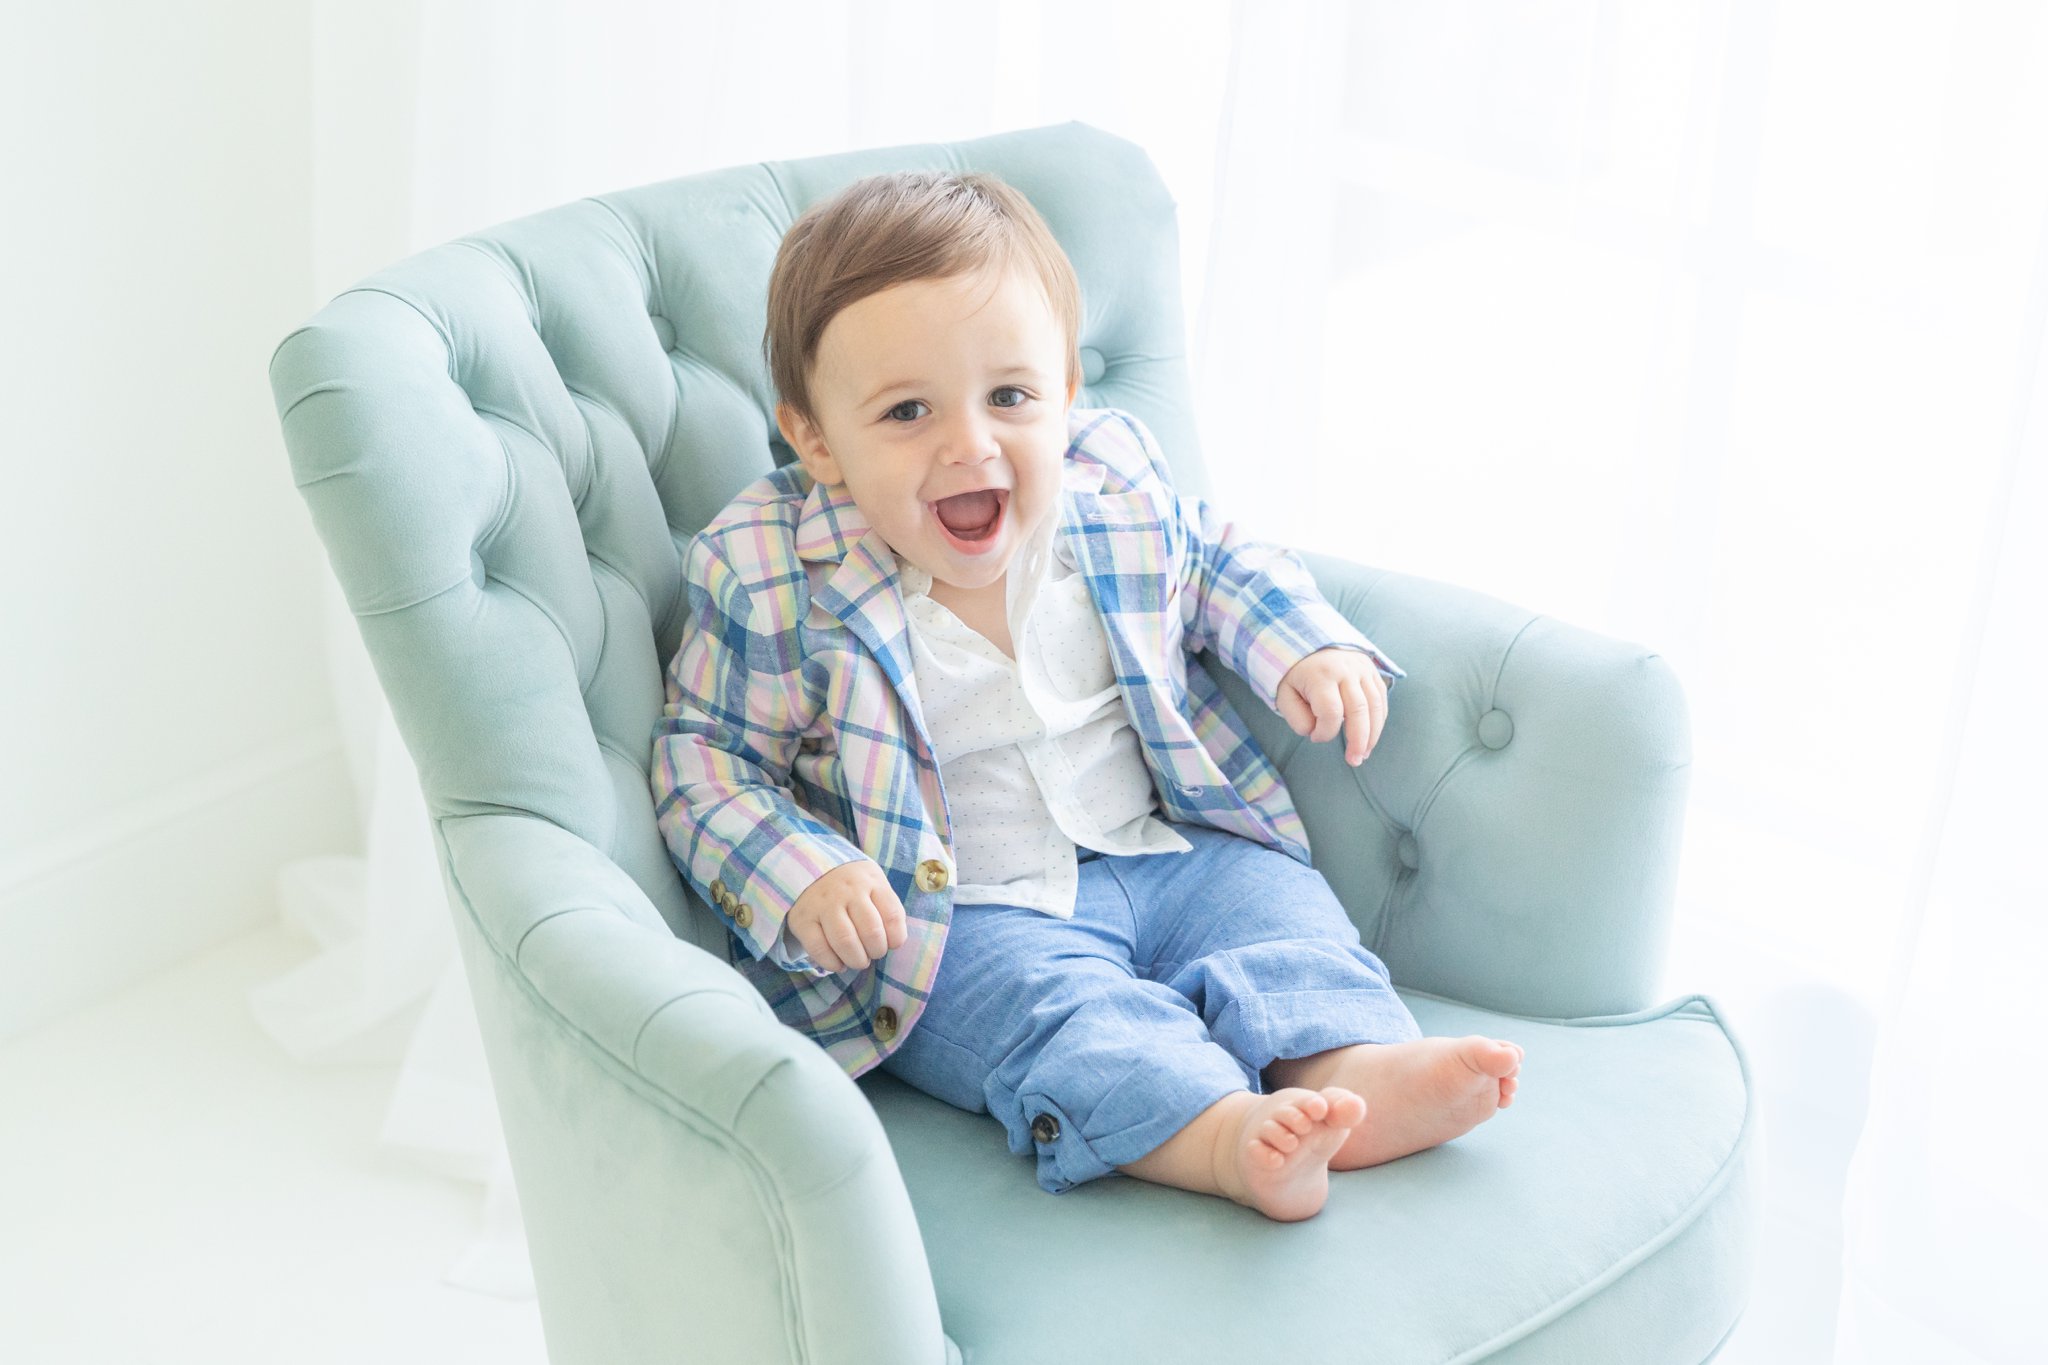 Baby boy sitting in turquoise chair.